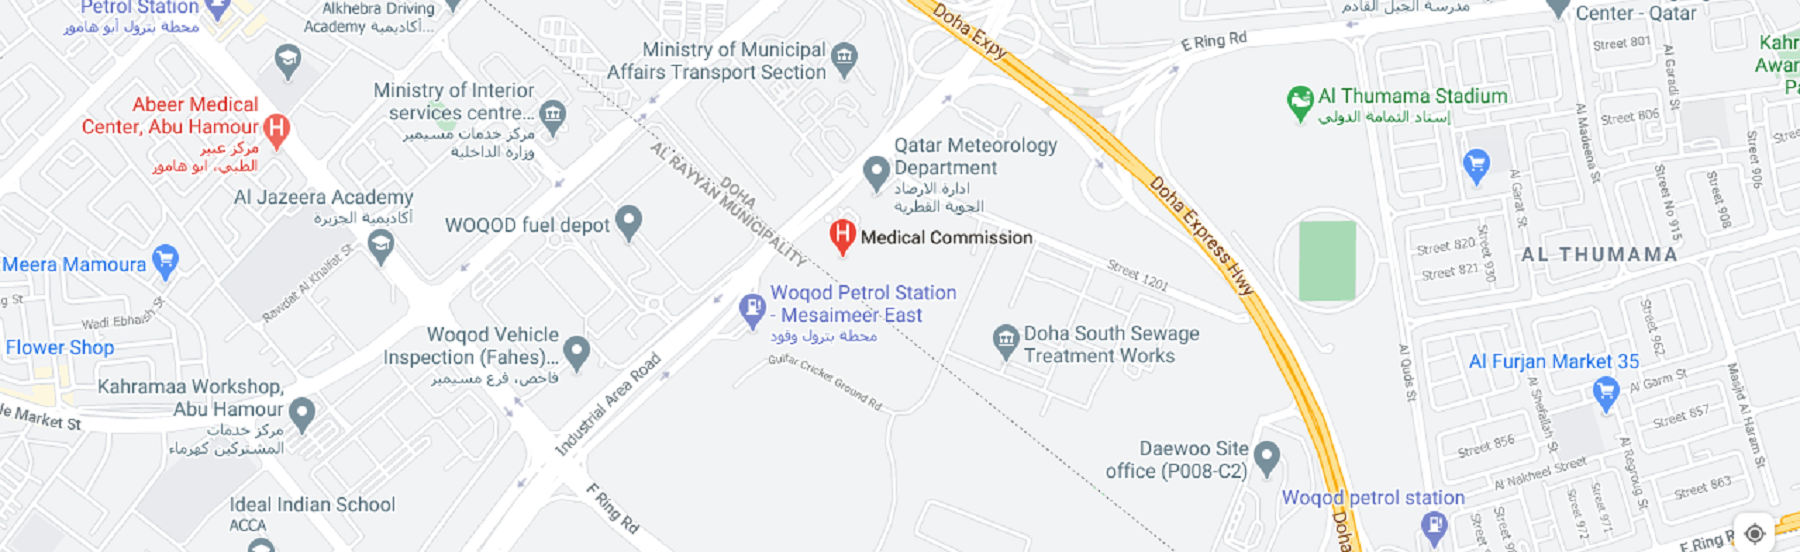 Medical Commission location on Google Map